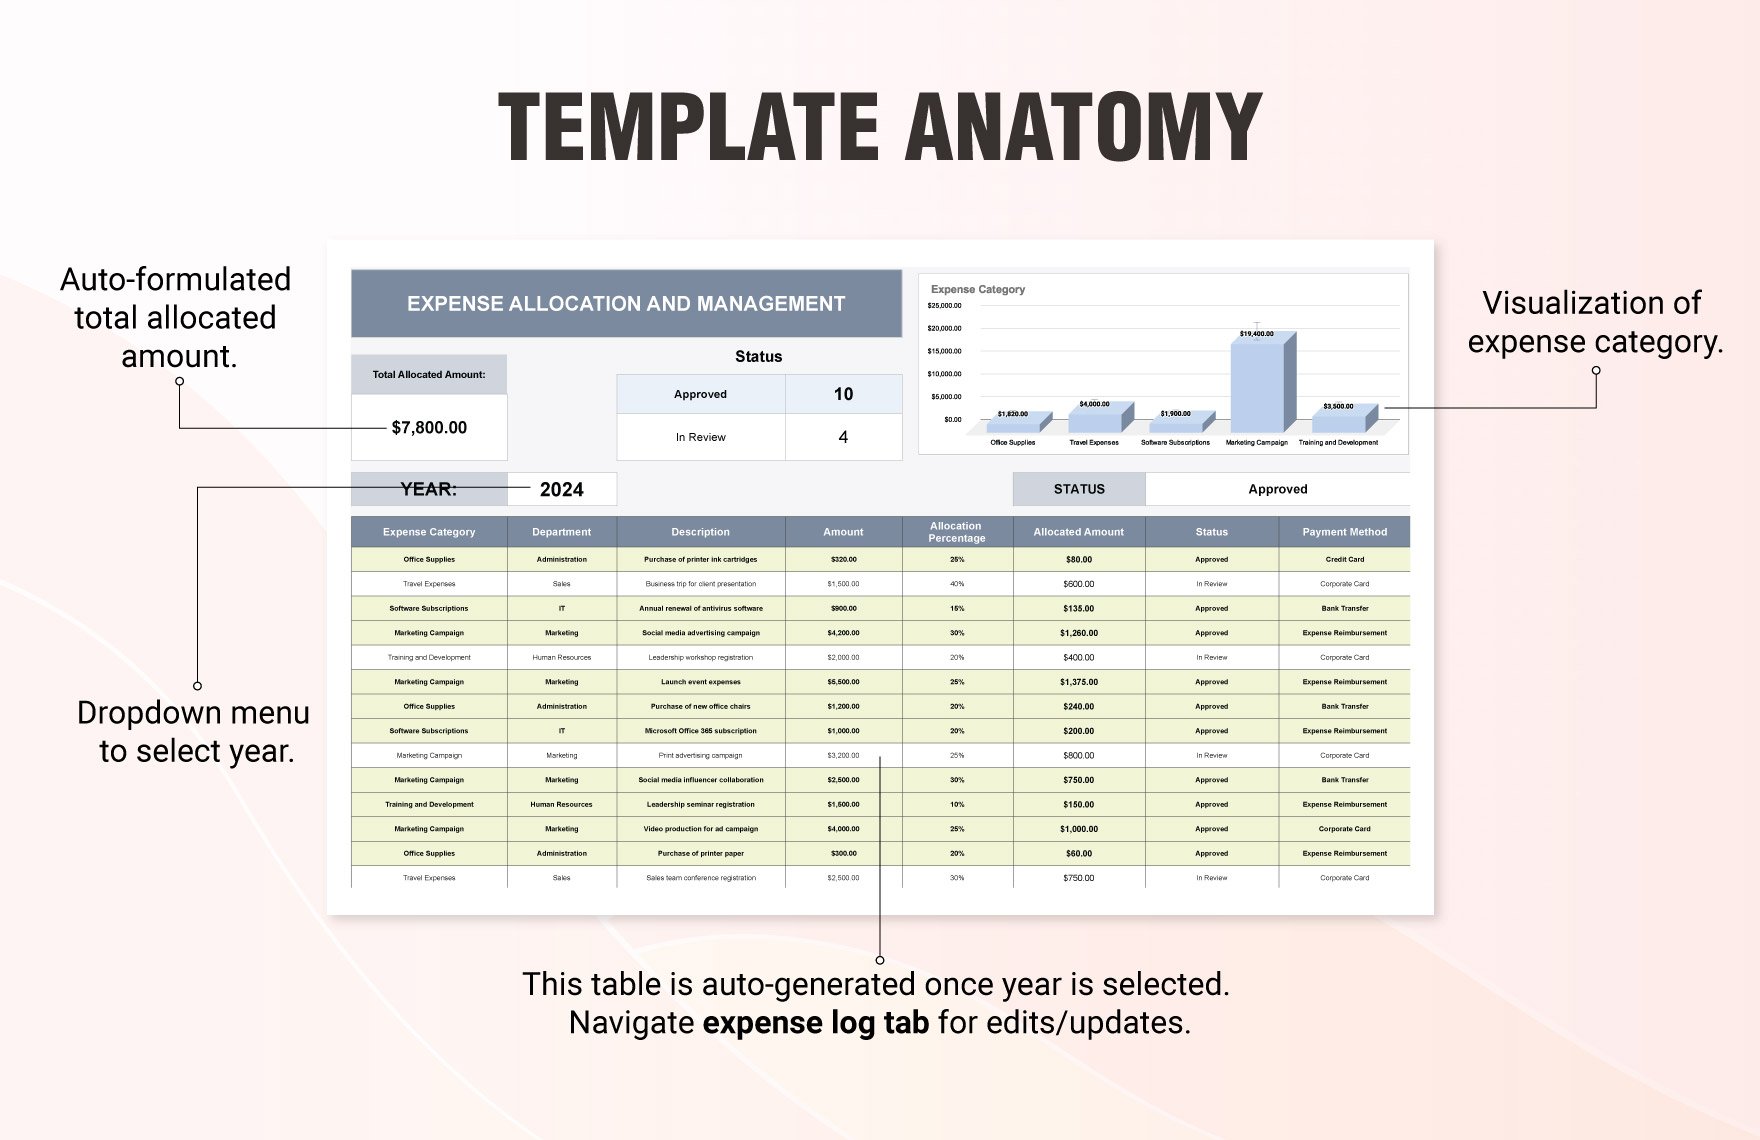 Expense Allocation and Management Template